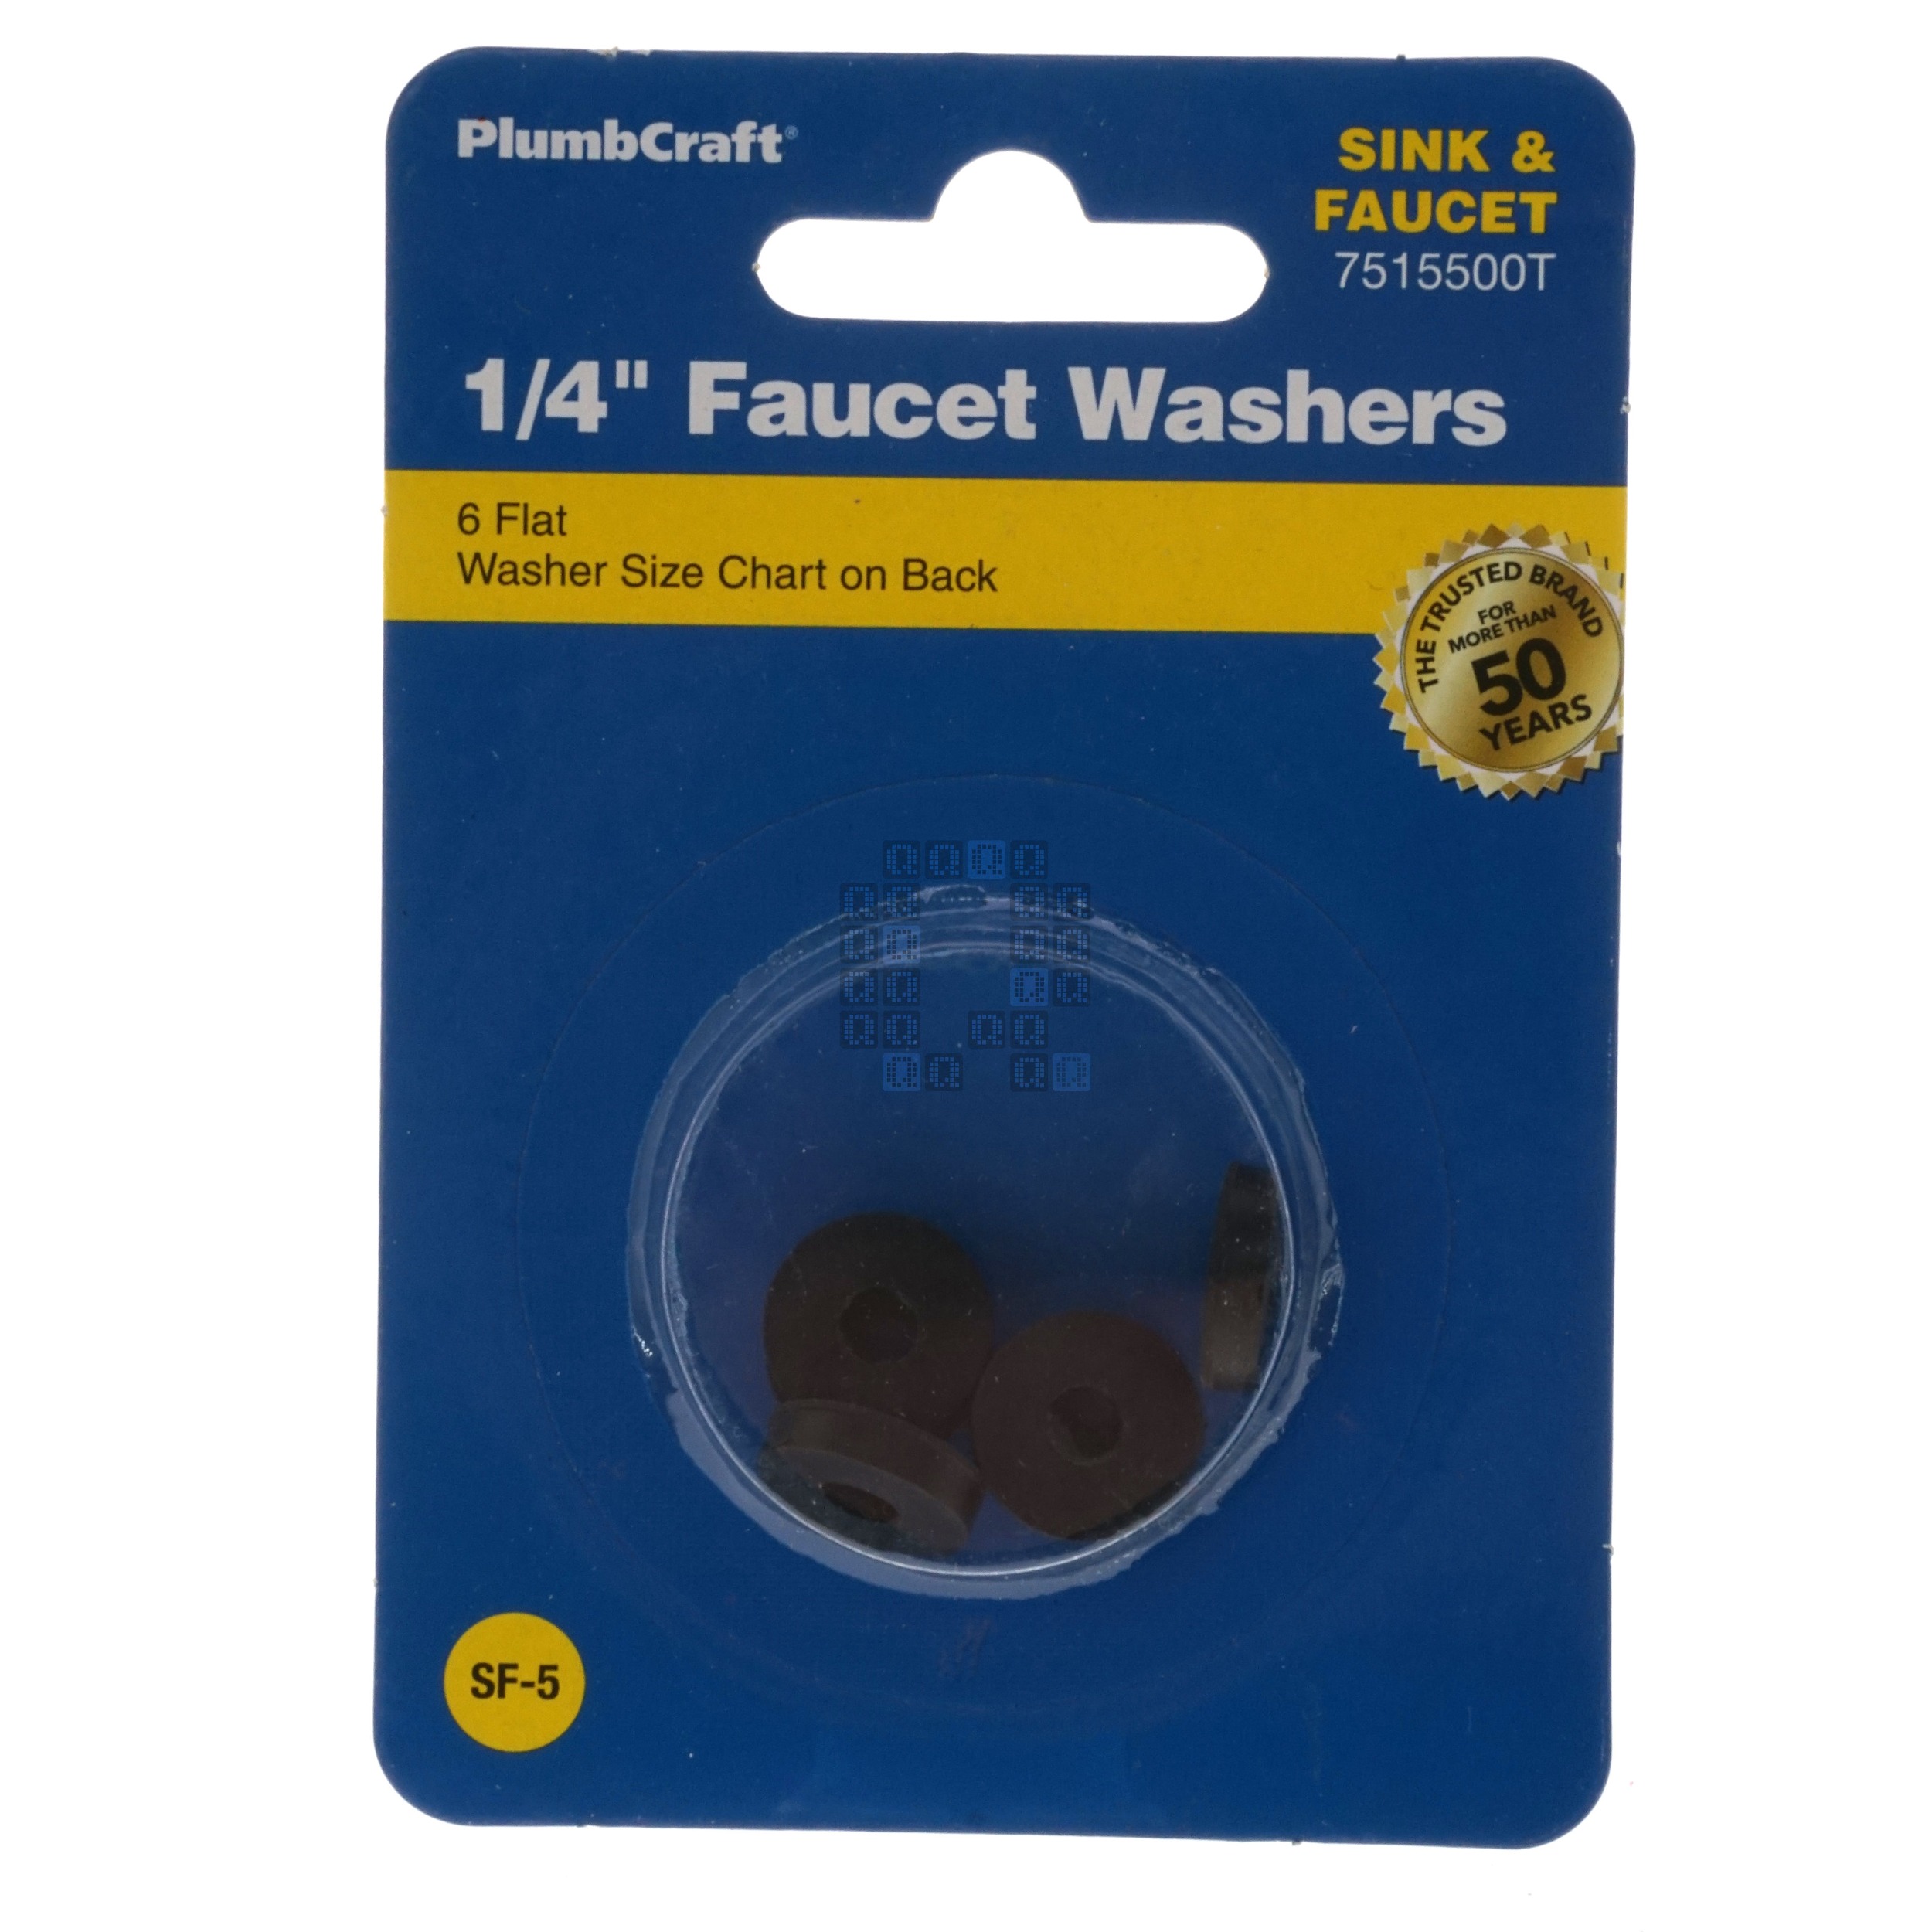 PlumbCraft 7515500T 1/4" Flat Faucet Washers, 6-Pack